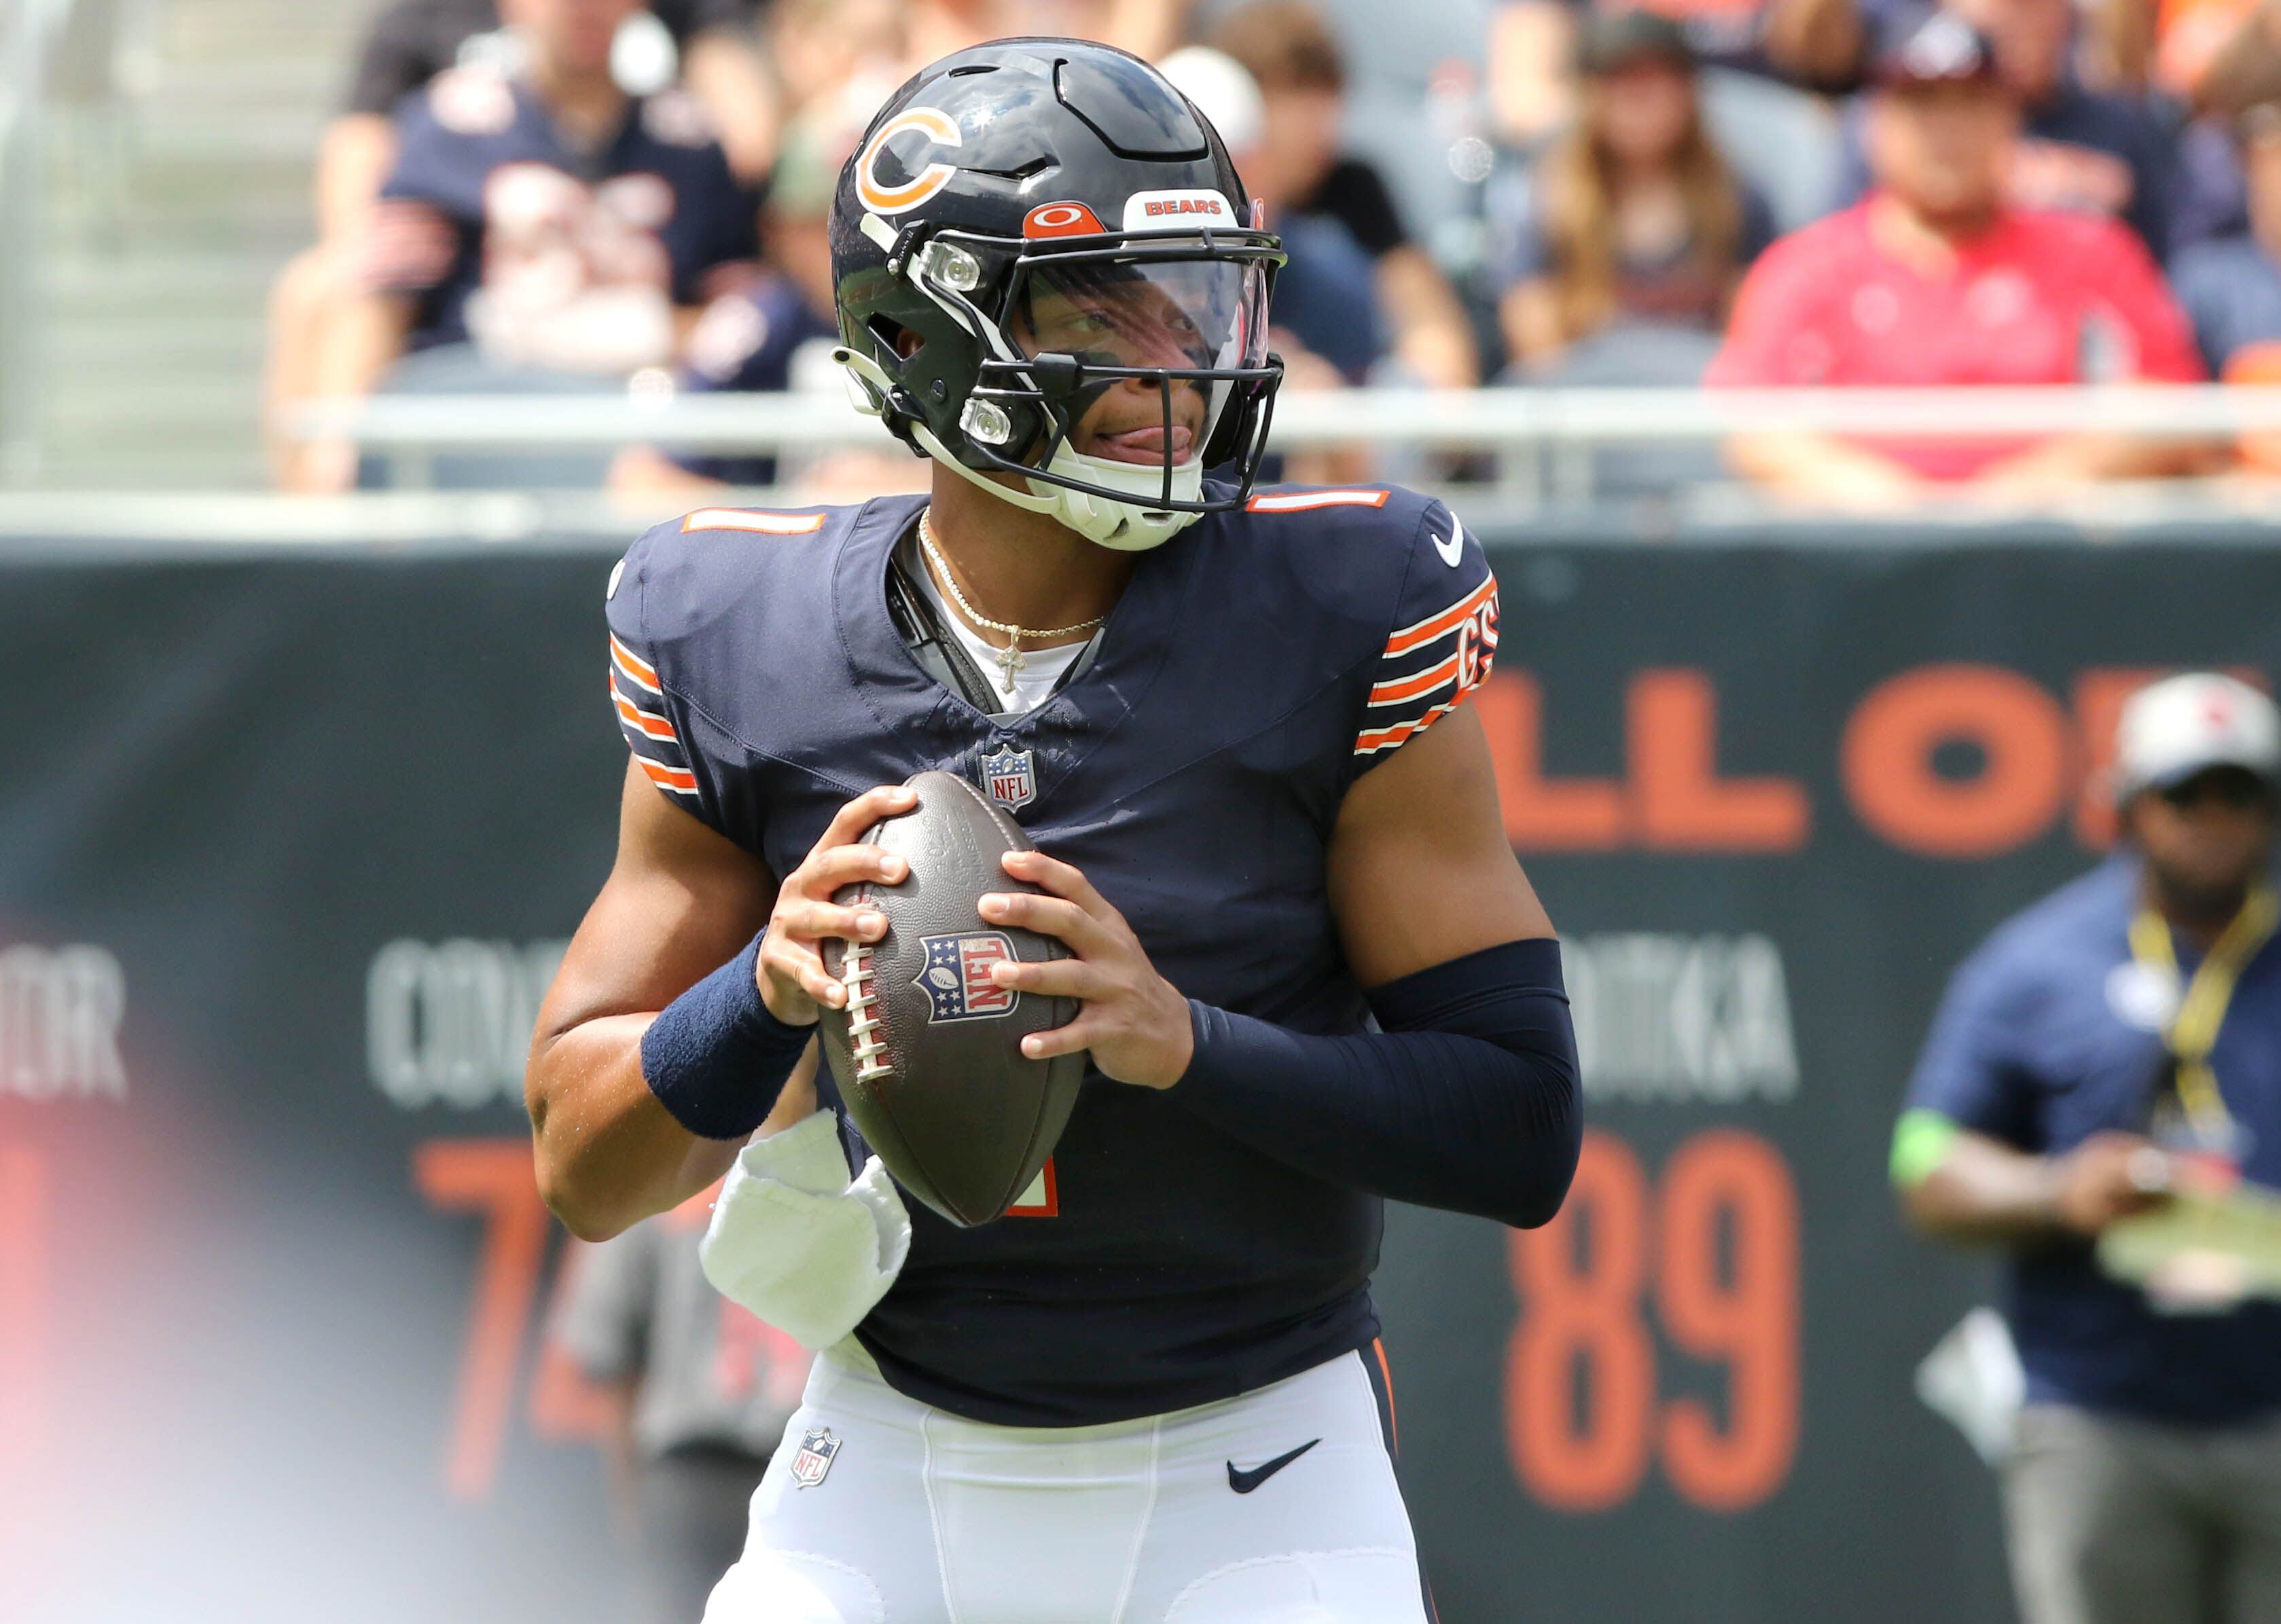 Chicago Bears: Justin Fields was solid on his only drive vs Seahawks